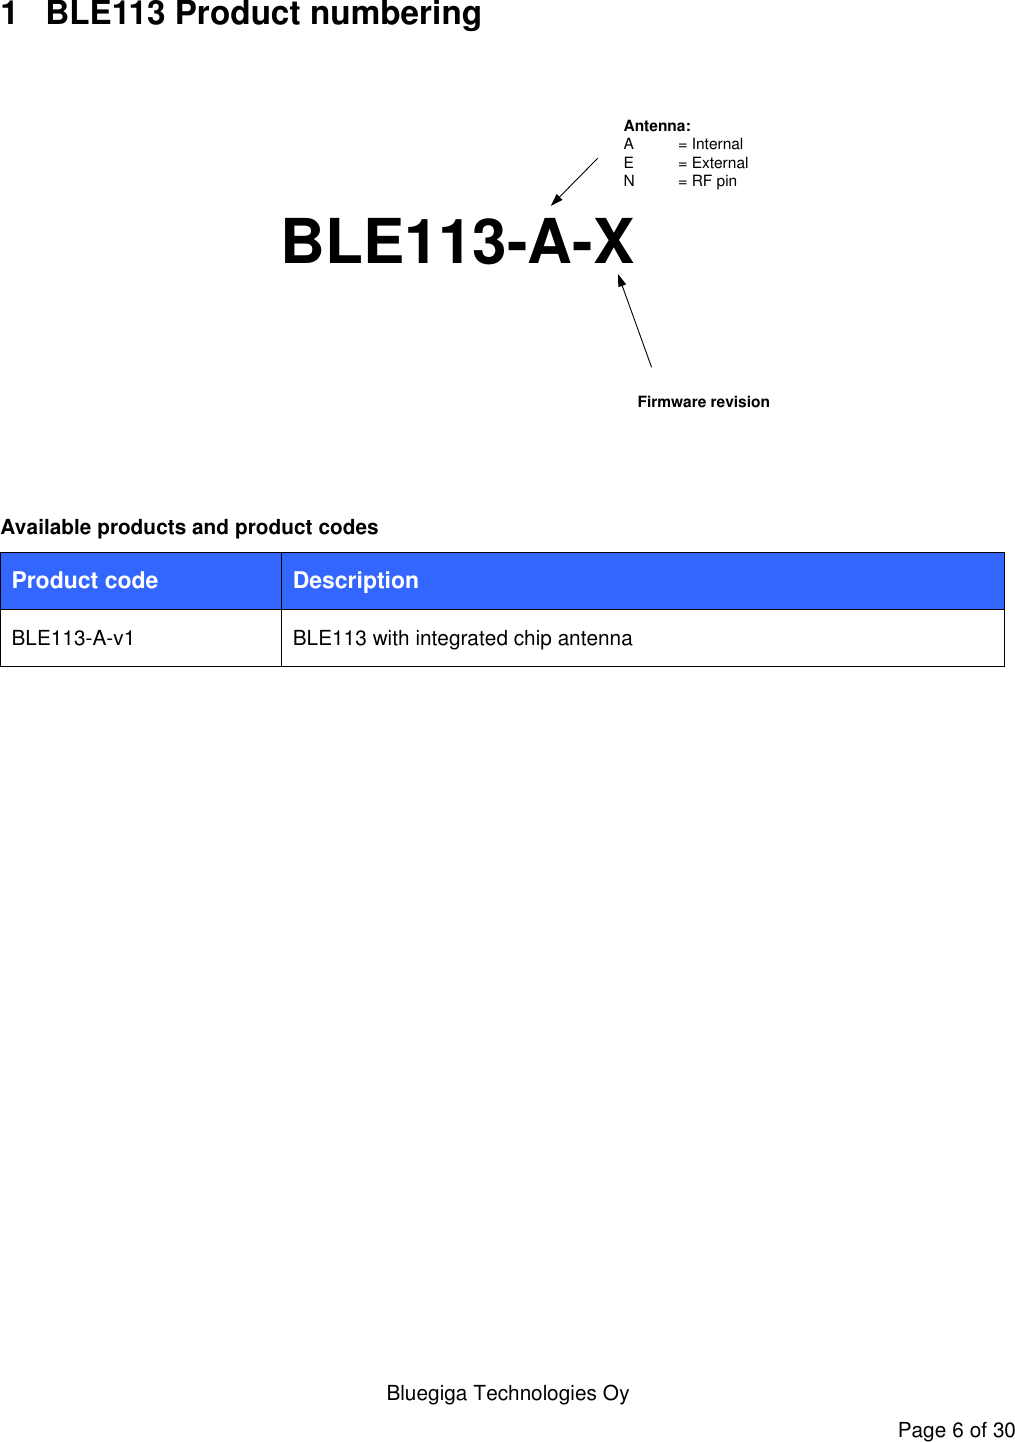   Bluegiga Technologies Oy Page 6 of 30 1  BLE113 Product numbering BLE113-A-X             Firmware revisionAntenna:A  = InternalE  = ExternalN  = RF pin Available products and product codes Product code Description BLE113-A-v1 BLE113 with integrated chip antenna 